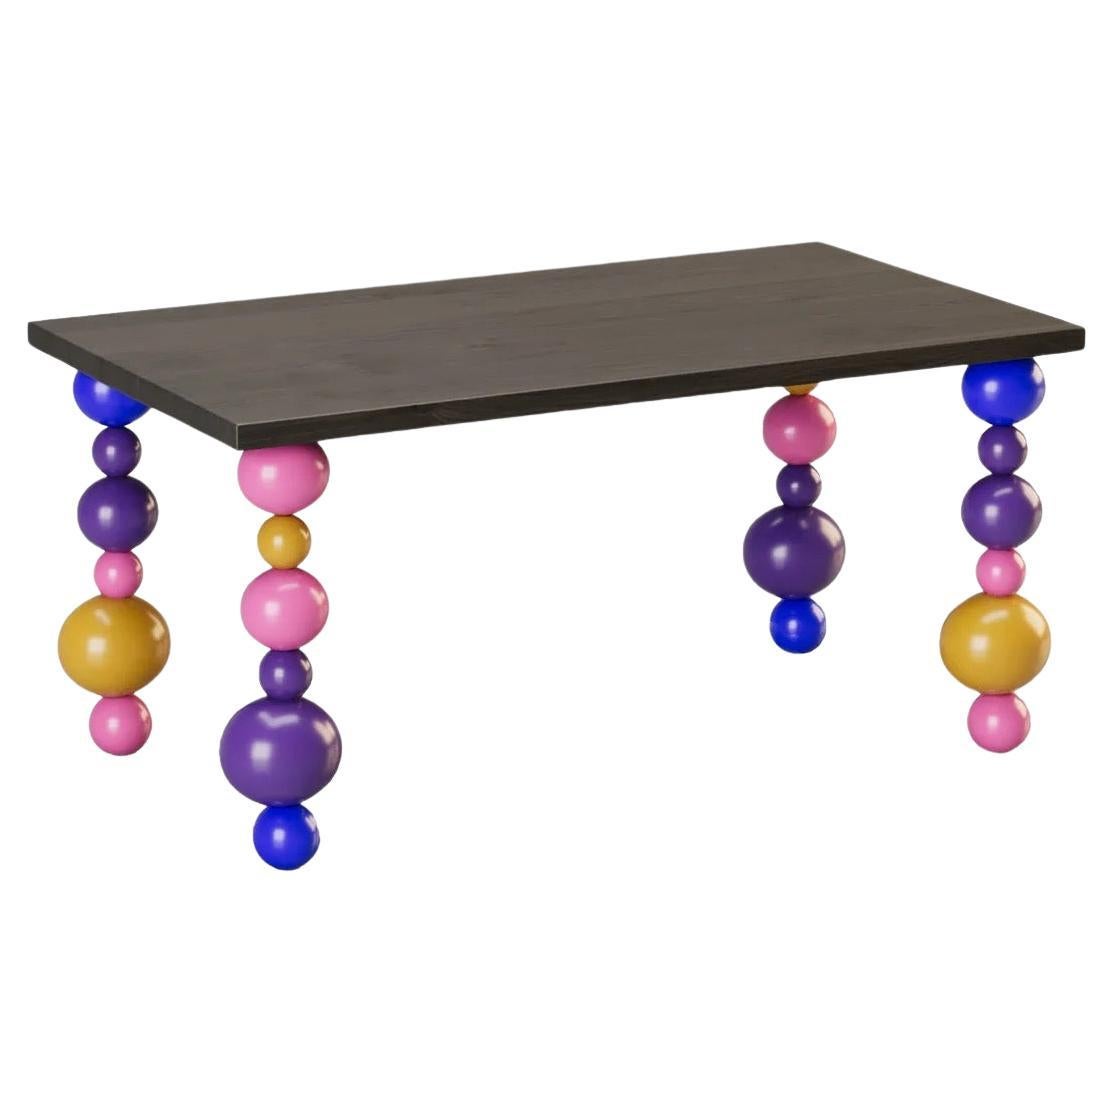 LA DOMINANTE Table by Alexandre Ligios, REP by Tuleste Factory For Sale